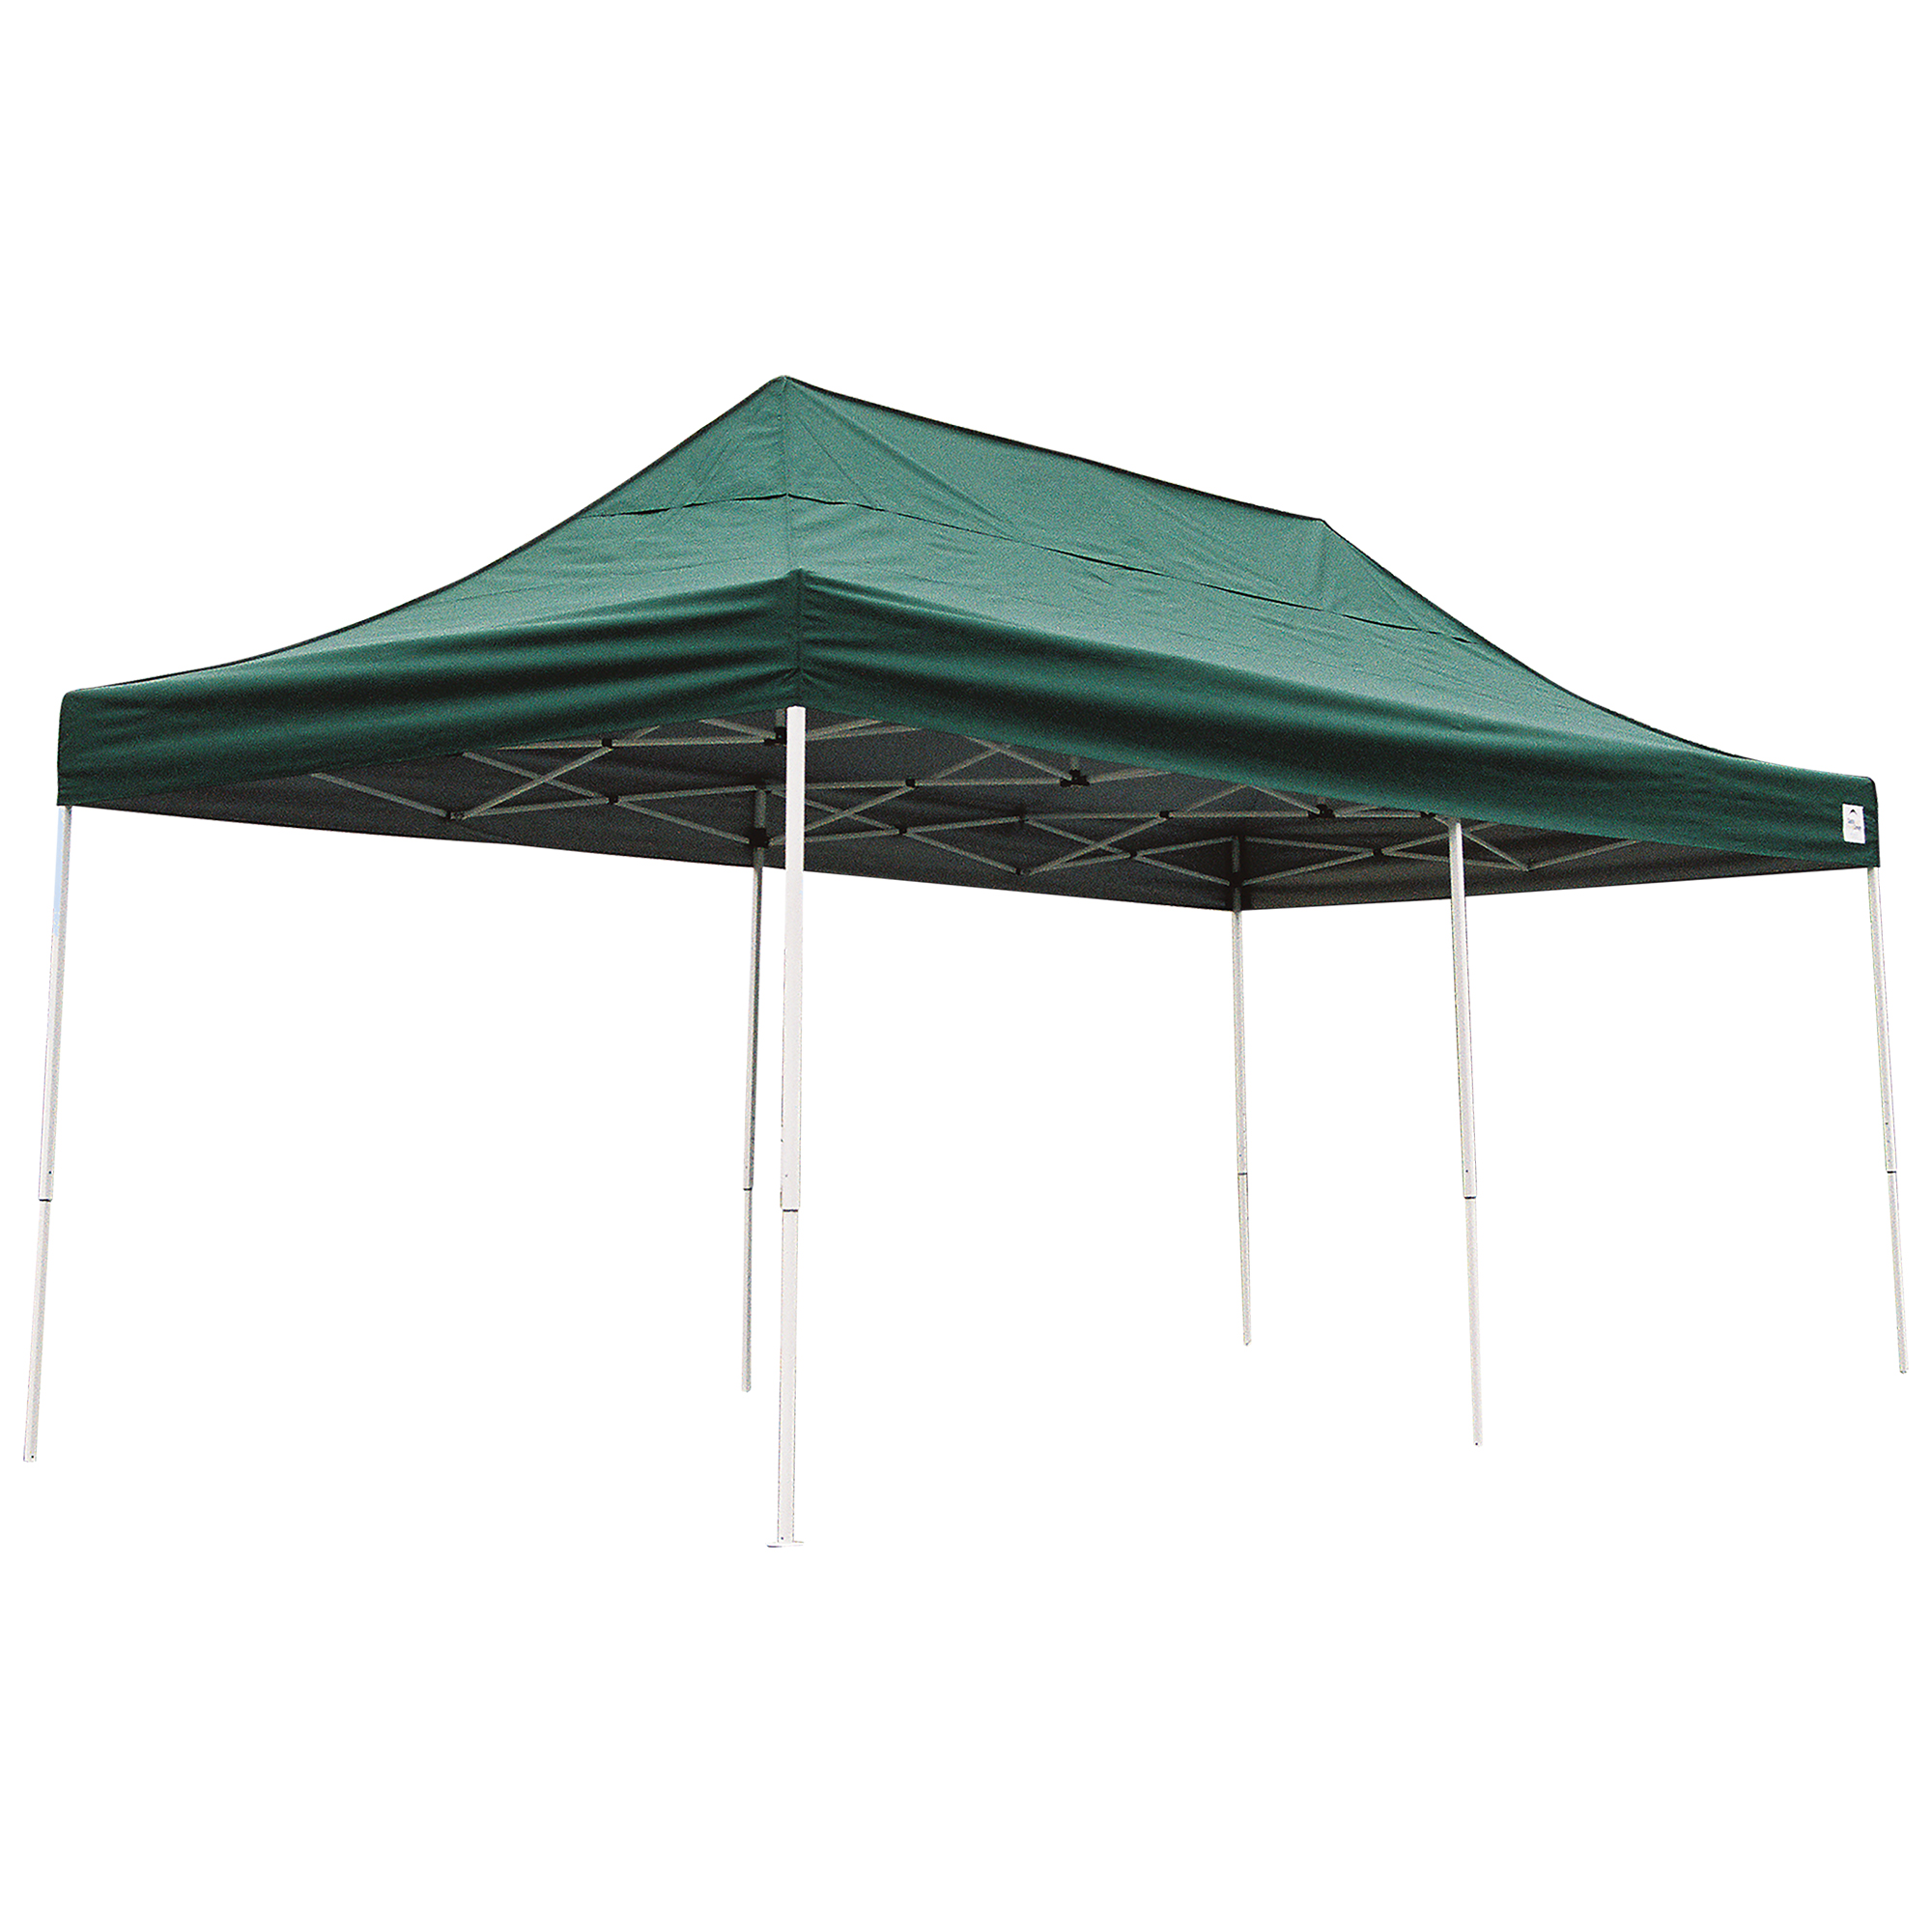 10 Ft. X 20 Ft. Pro Pop-up Canopy Straight Leg, Green Cover